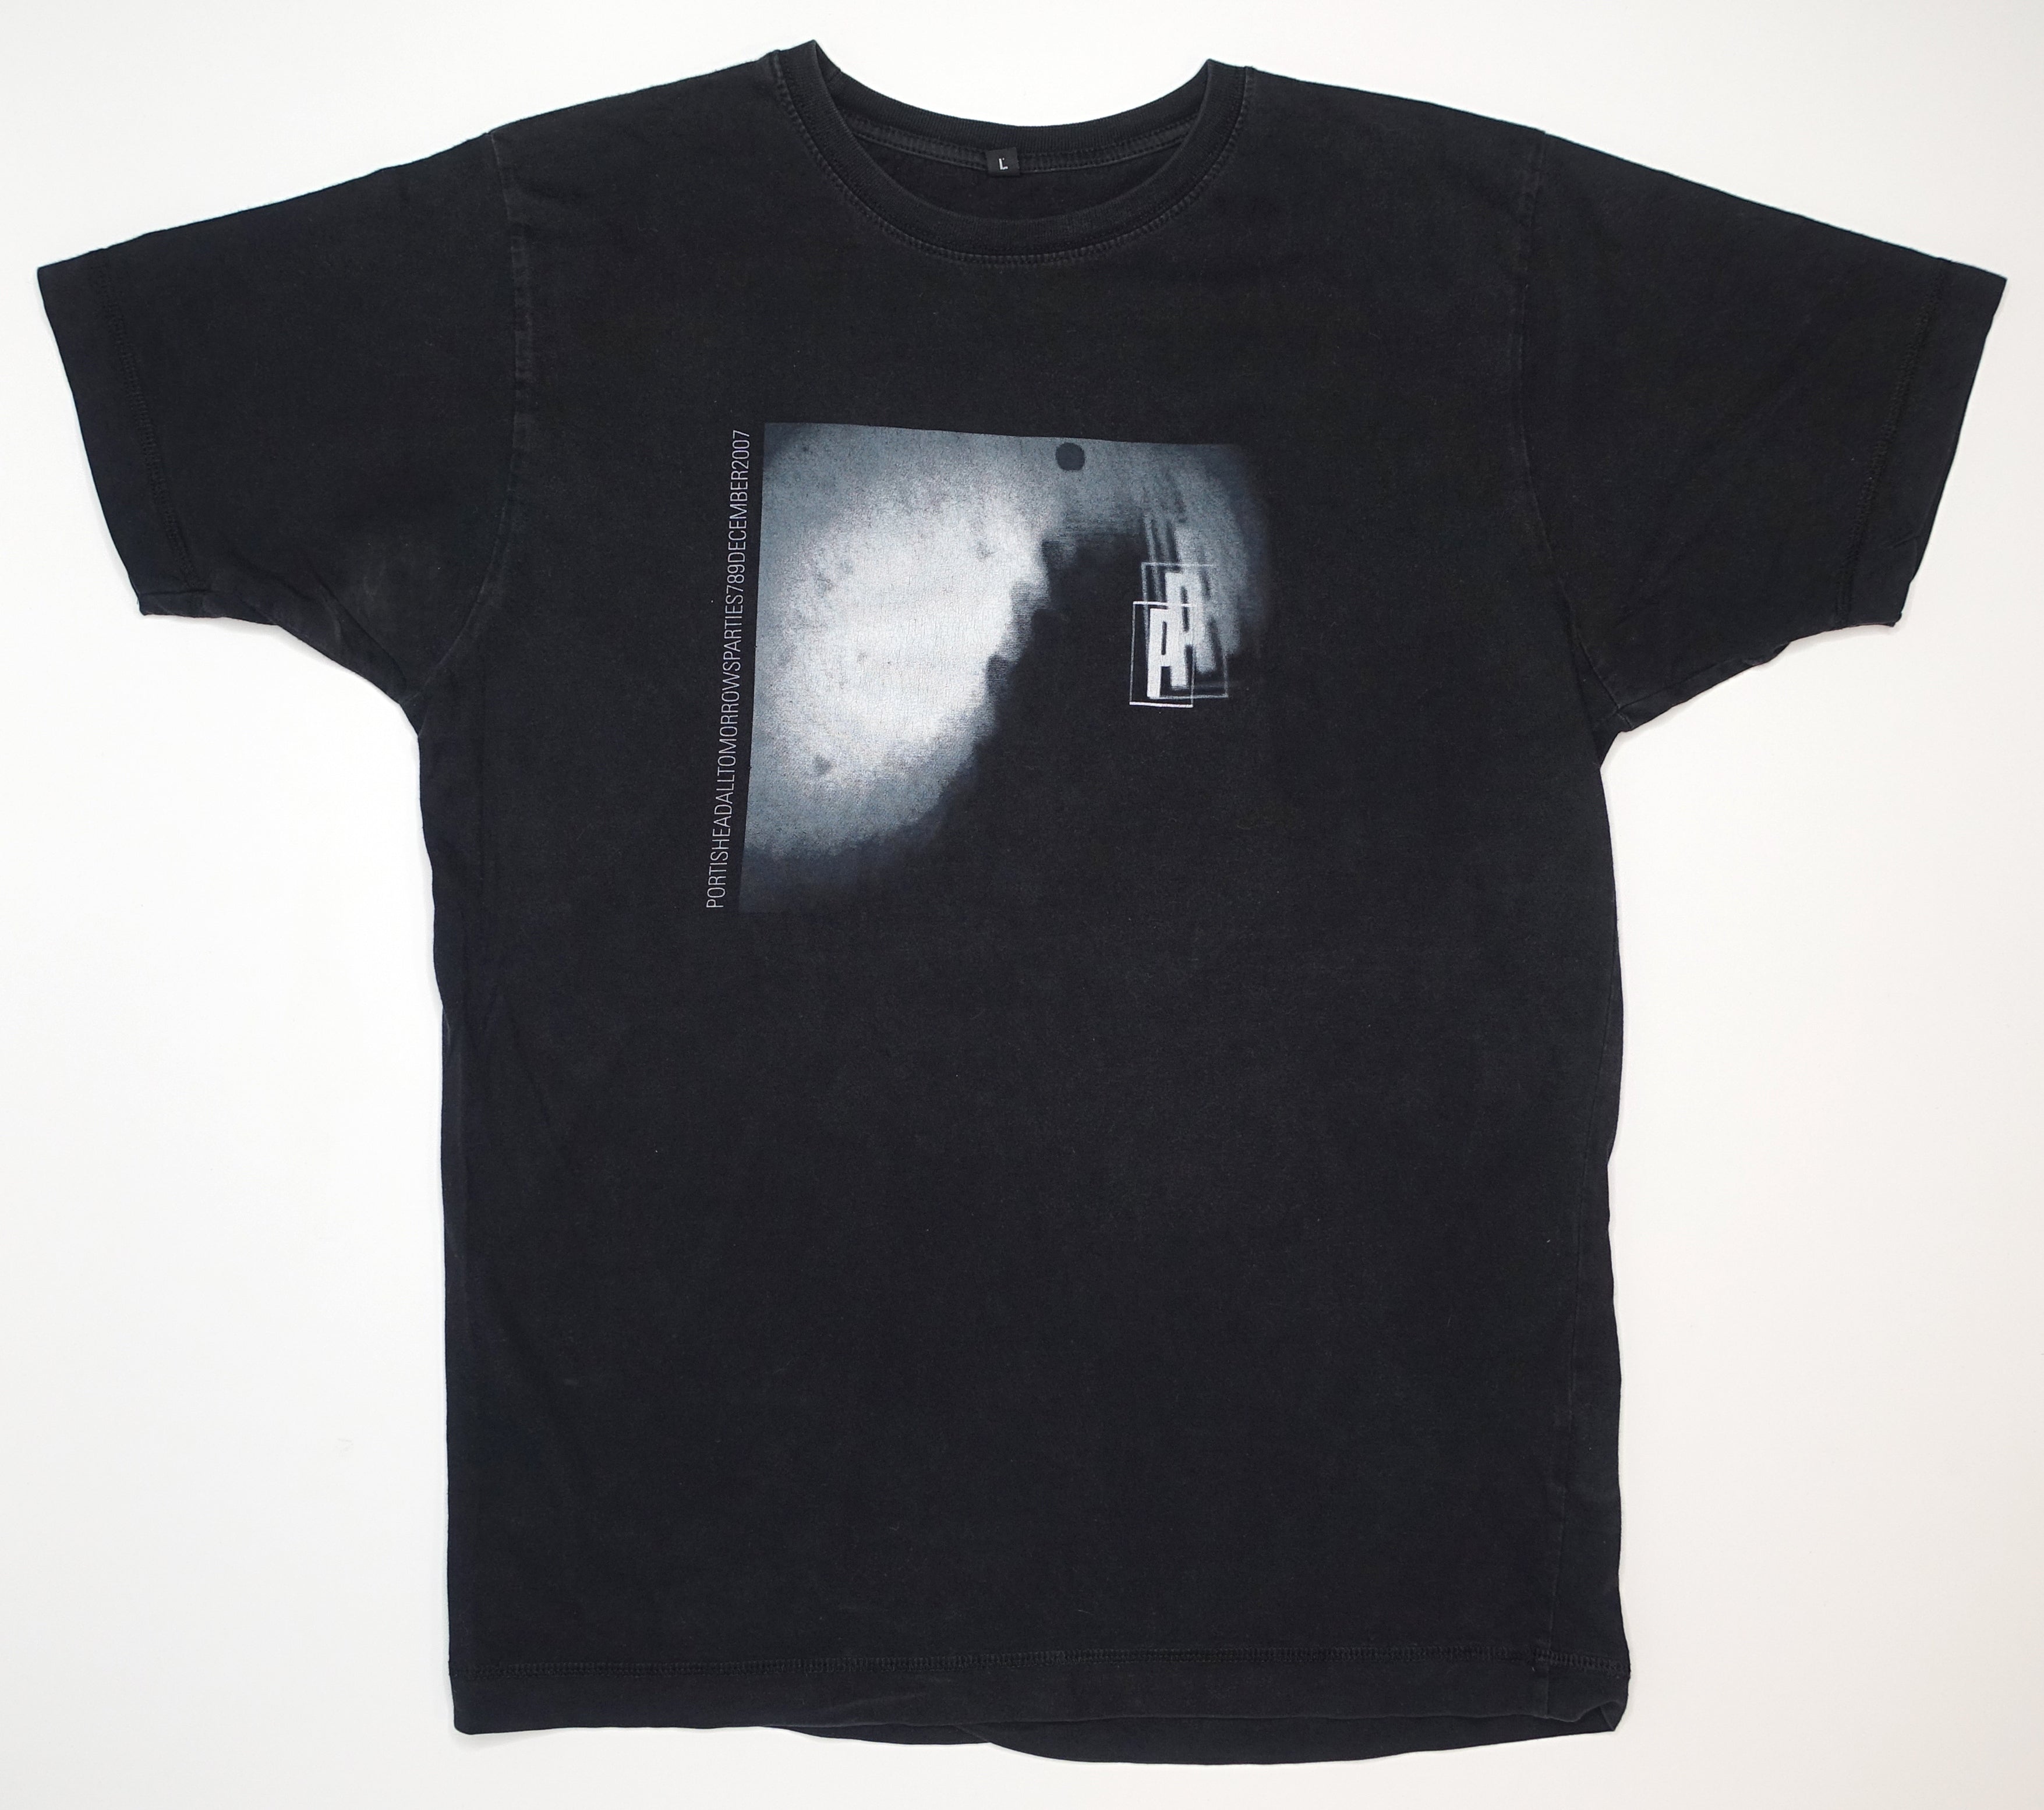 Portishead - All Tomorrow's Parties December 2007 Tour Shirt Size Large